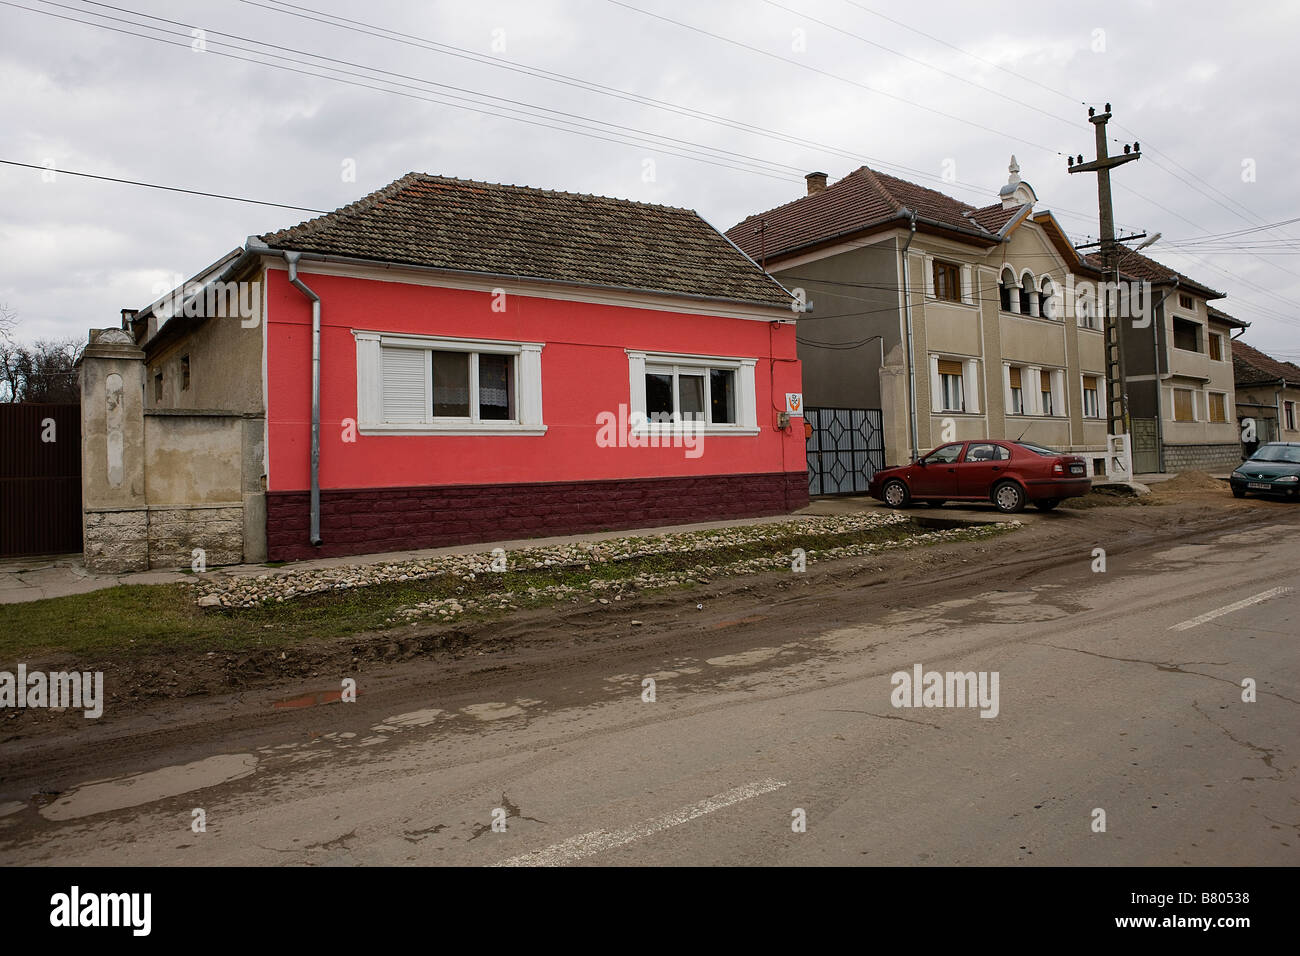 Romanian placement centre or orphanage run by Romanian Relief in Tinca Romania (red building) Stock Photo